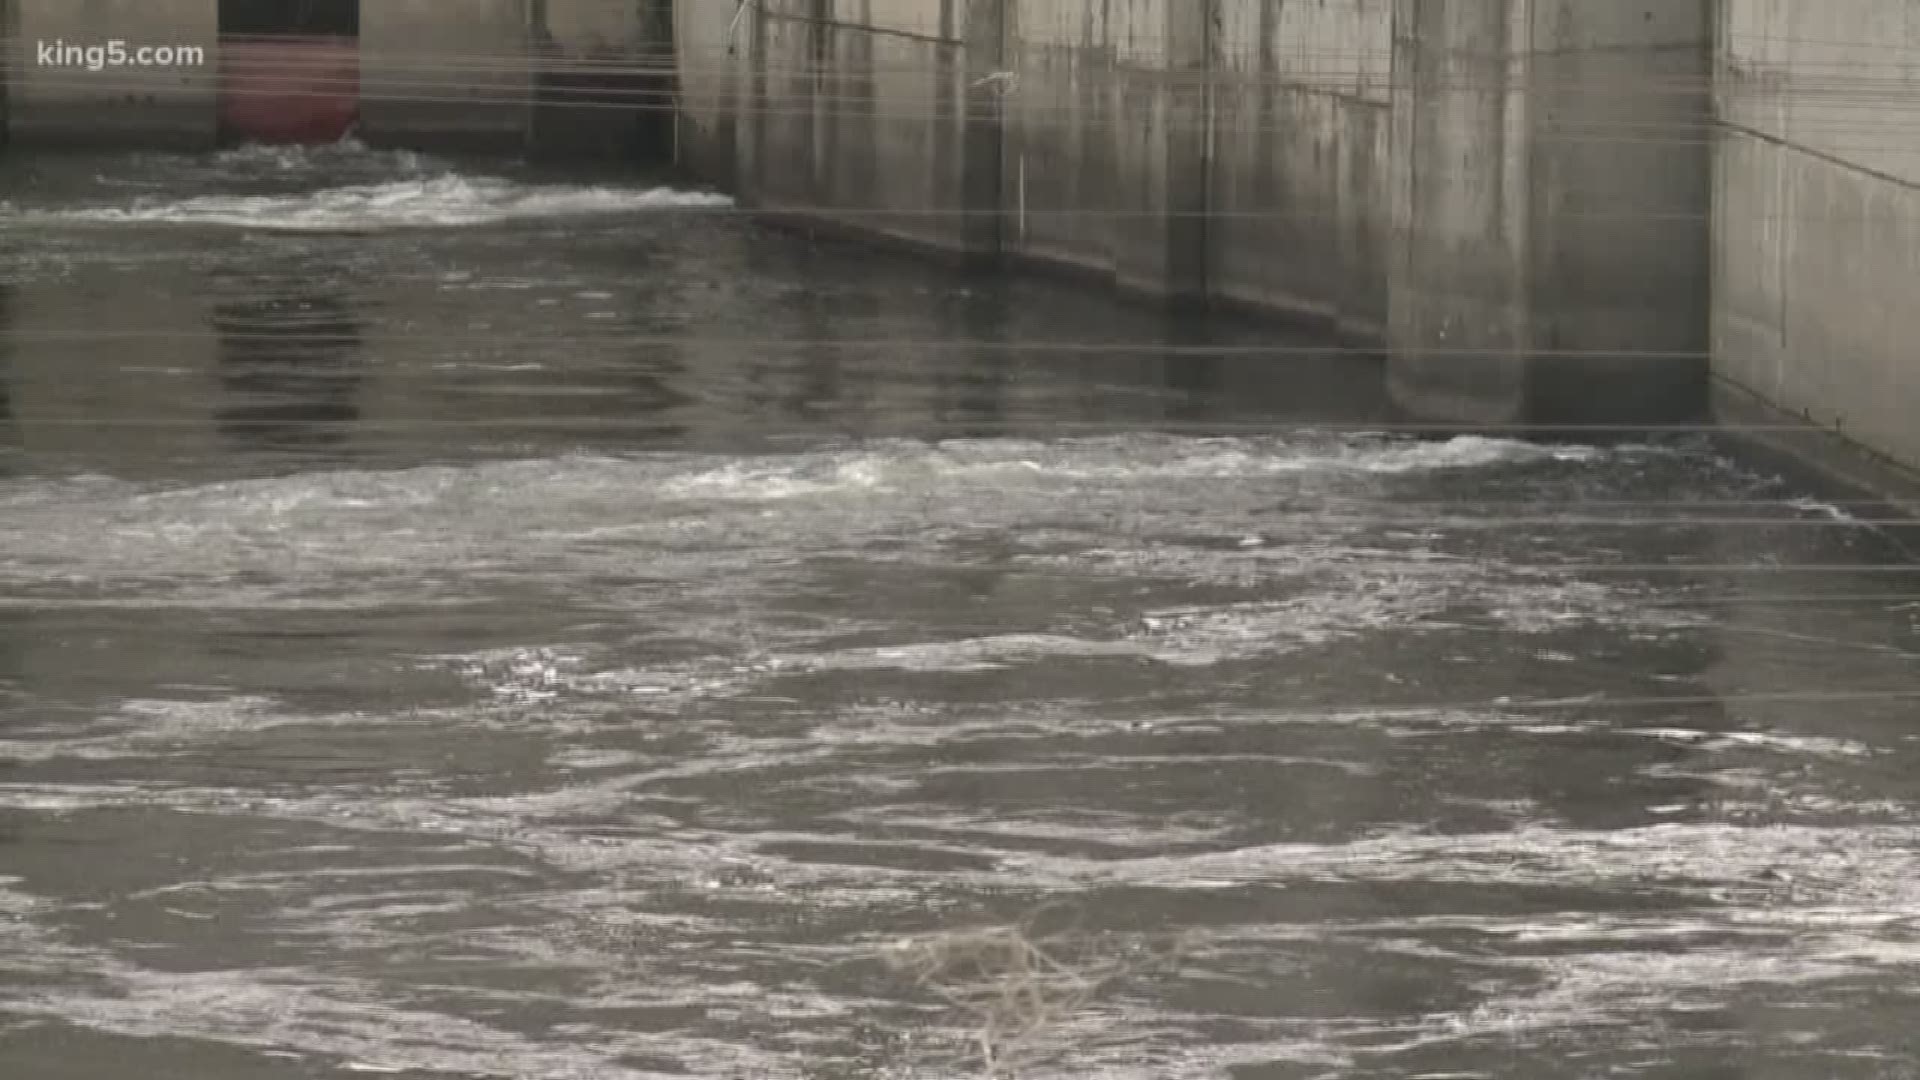 A retired government fish biologist is criticizing his former employer for ignoring a salmon crisis on the Columbia River system. He told KING 5 Environmental Reporter Alison Morrow, millions of tax dollars are wasted on four dams, while the fish continue to disappear.